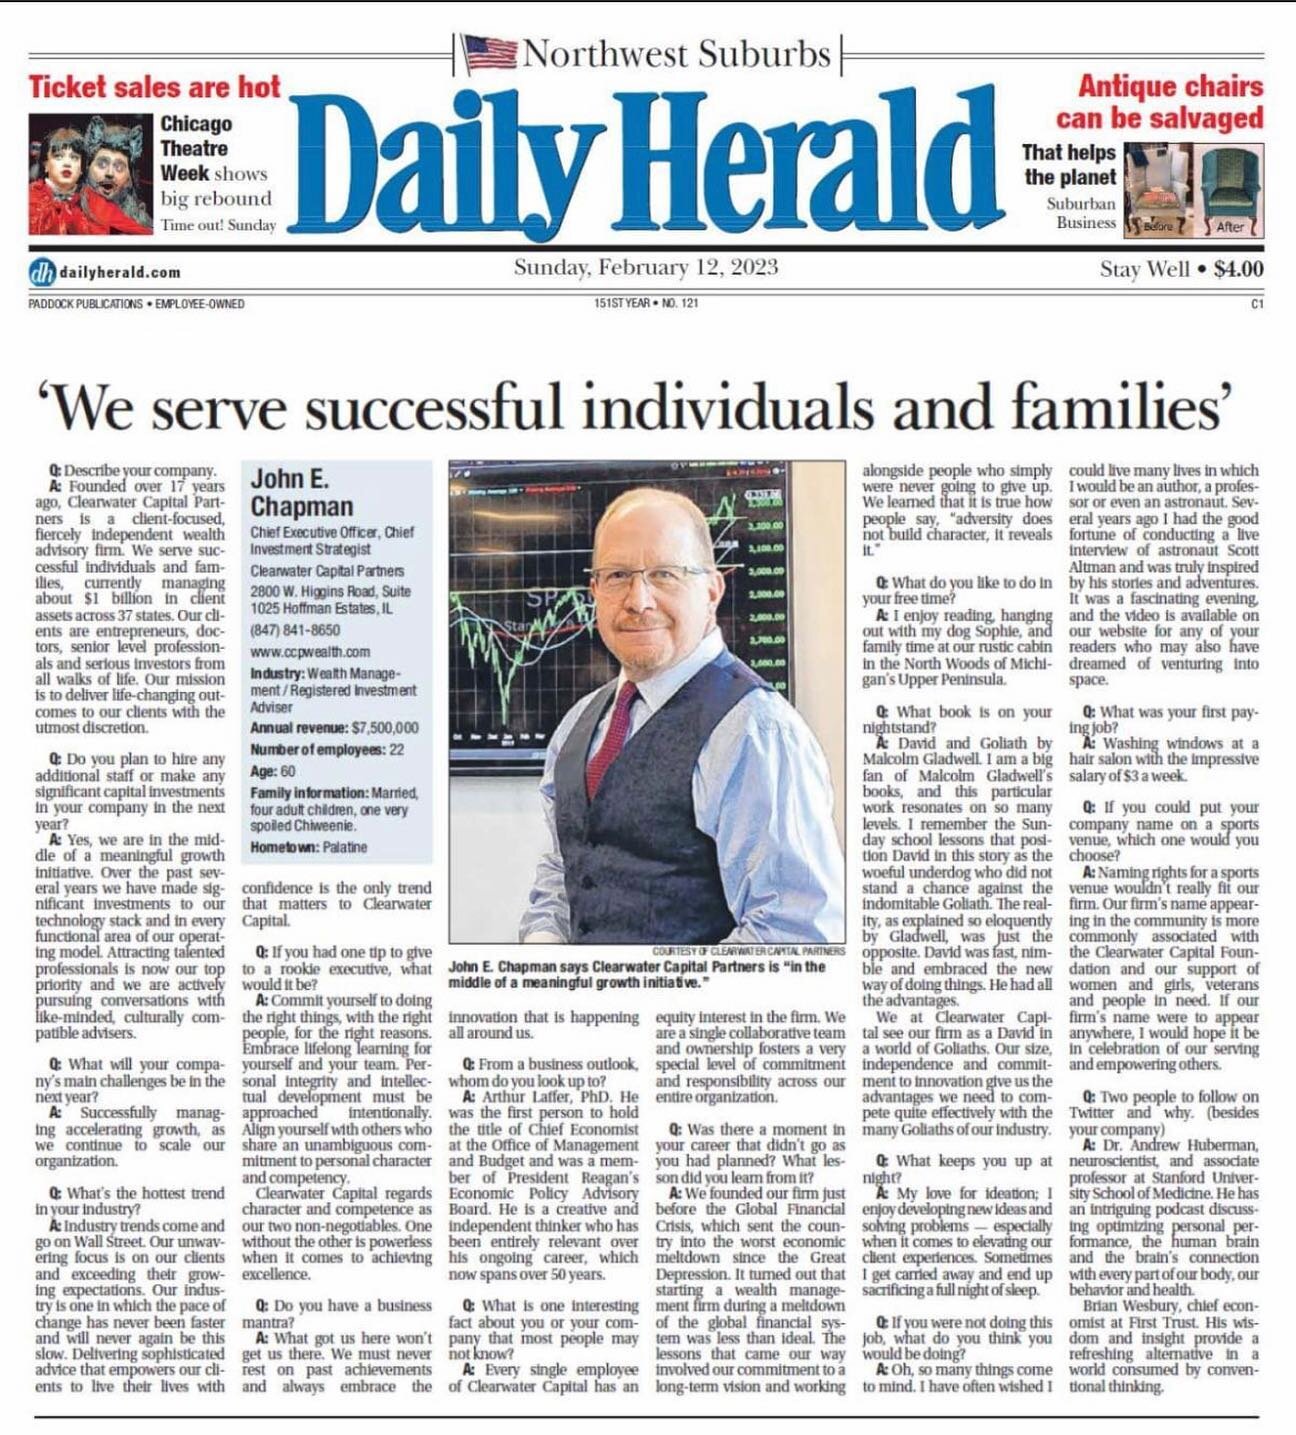 This week our founder and CEO, John Chapman, was again featured in the Daily Herald.  To read this interesting interview, please click news link in bio.